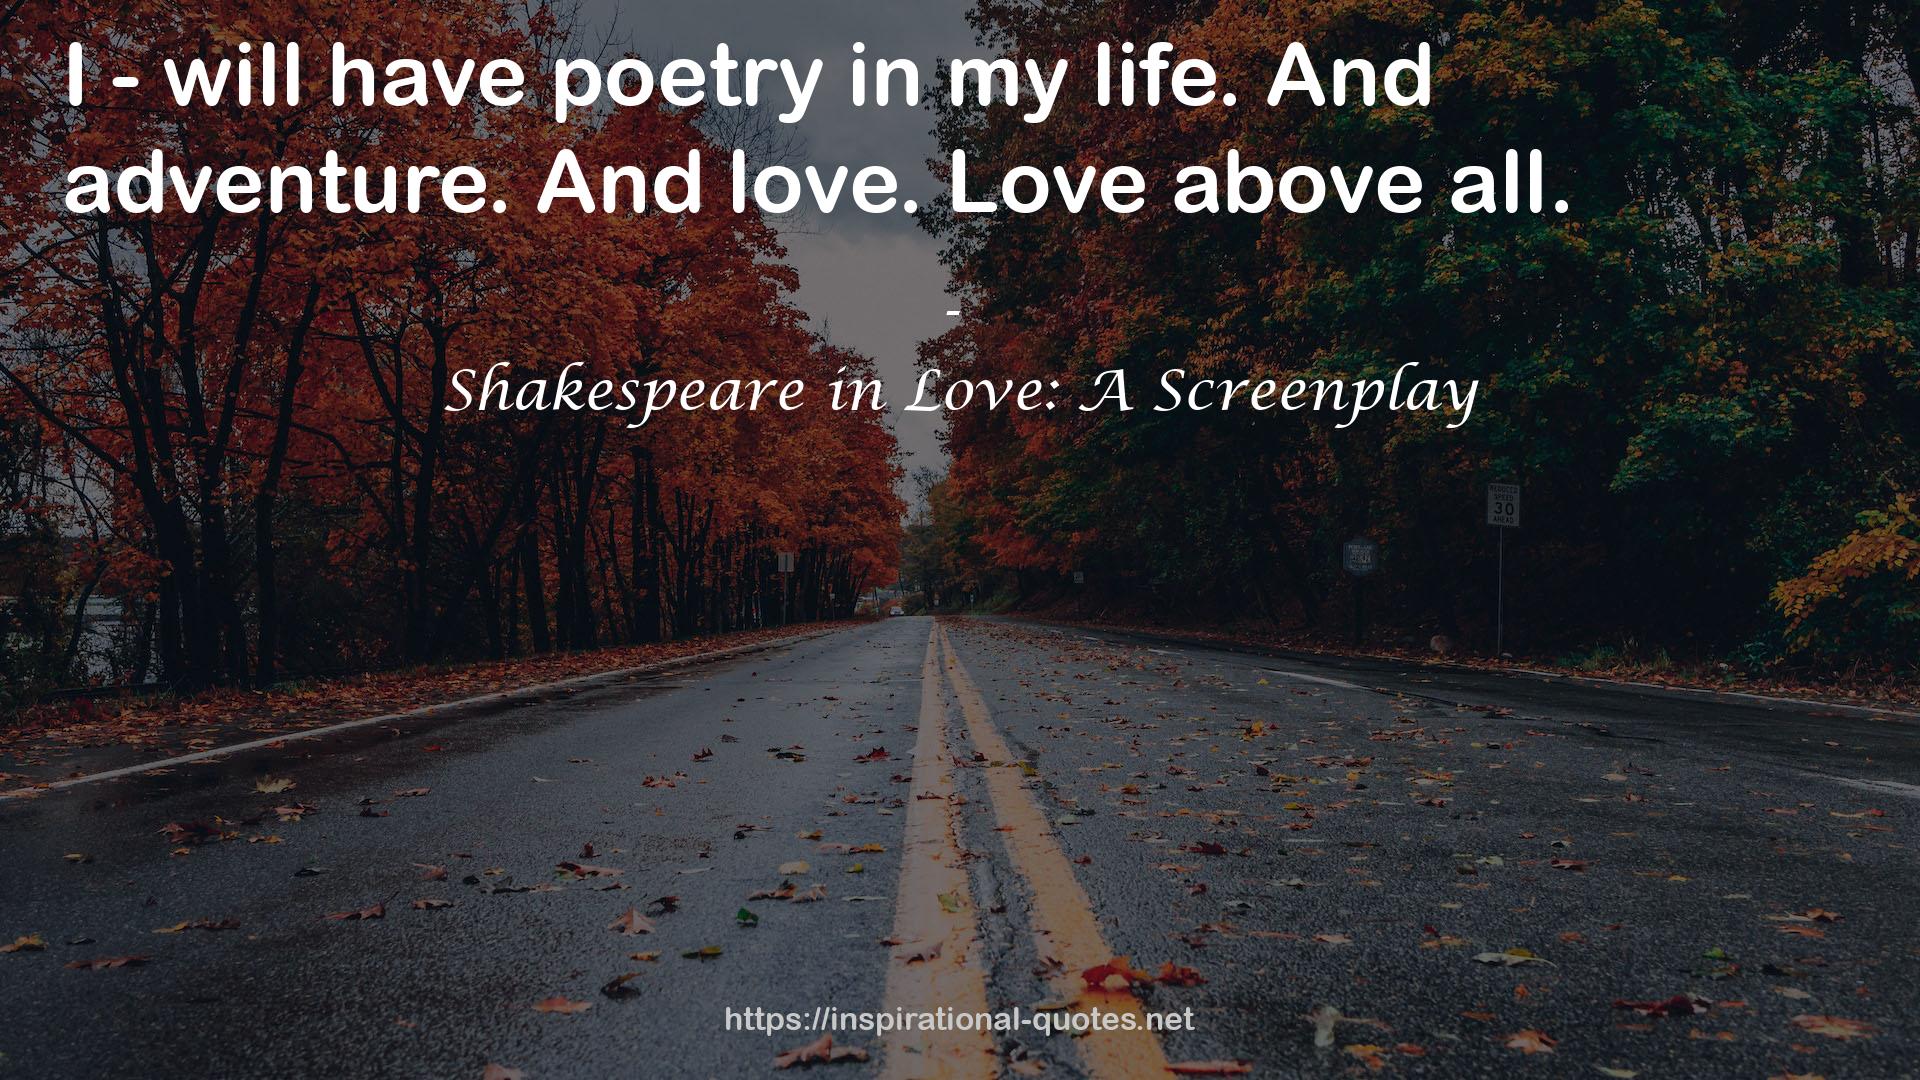 Shakespeare in Love: A Screenplay QUOTES